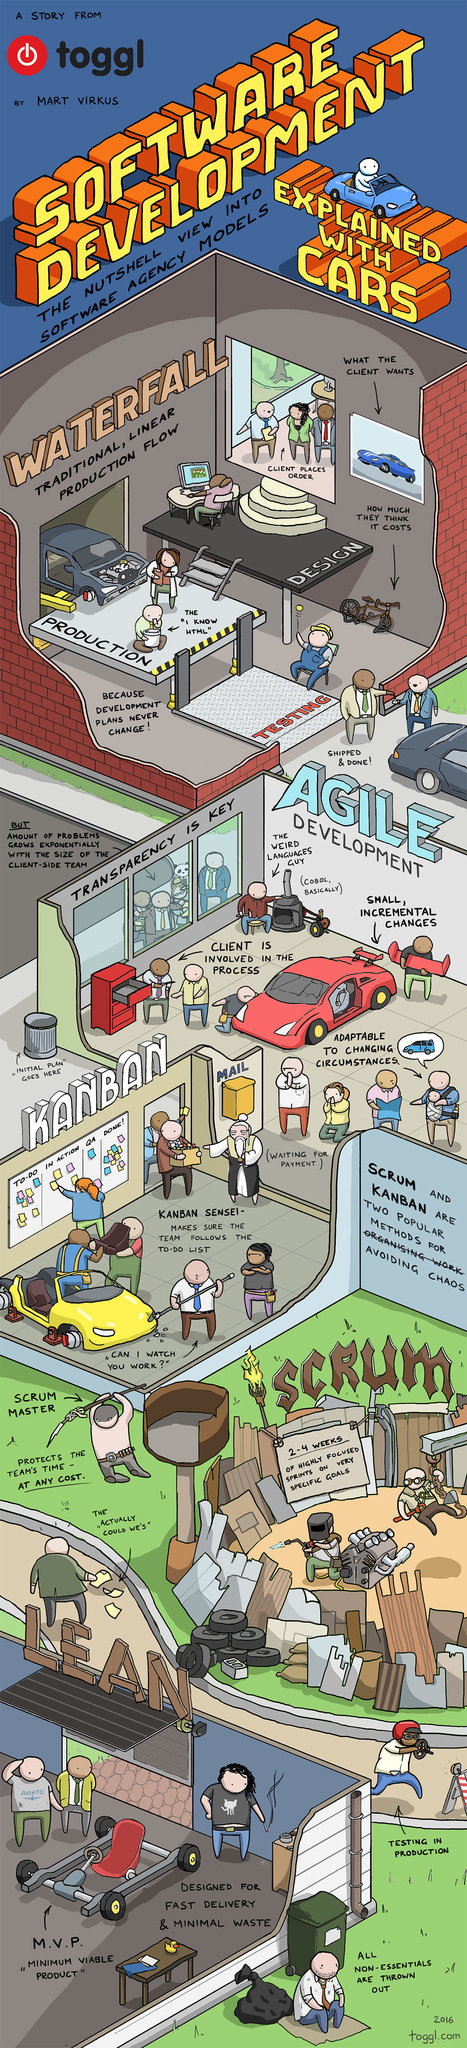 Software development explained with cars | Devops for Growth | Scoop.it